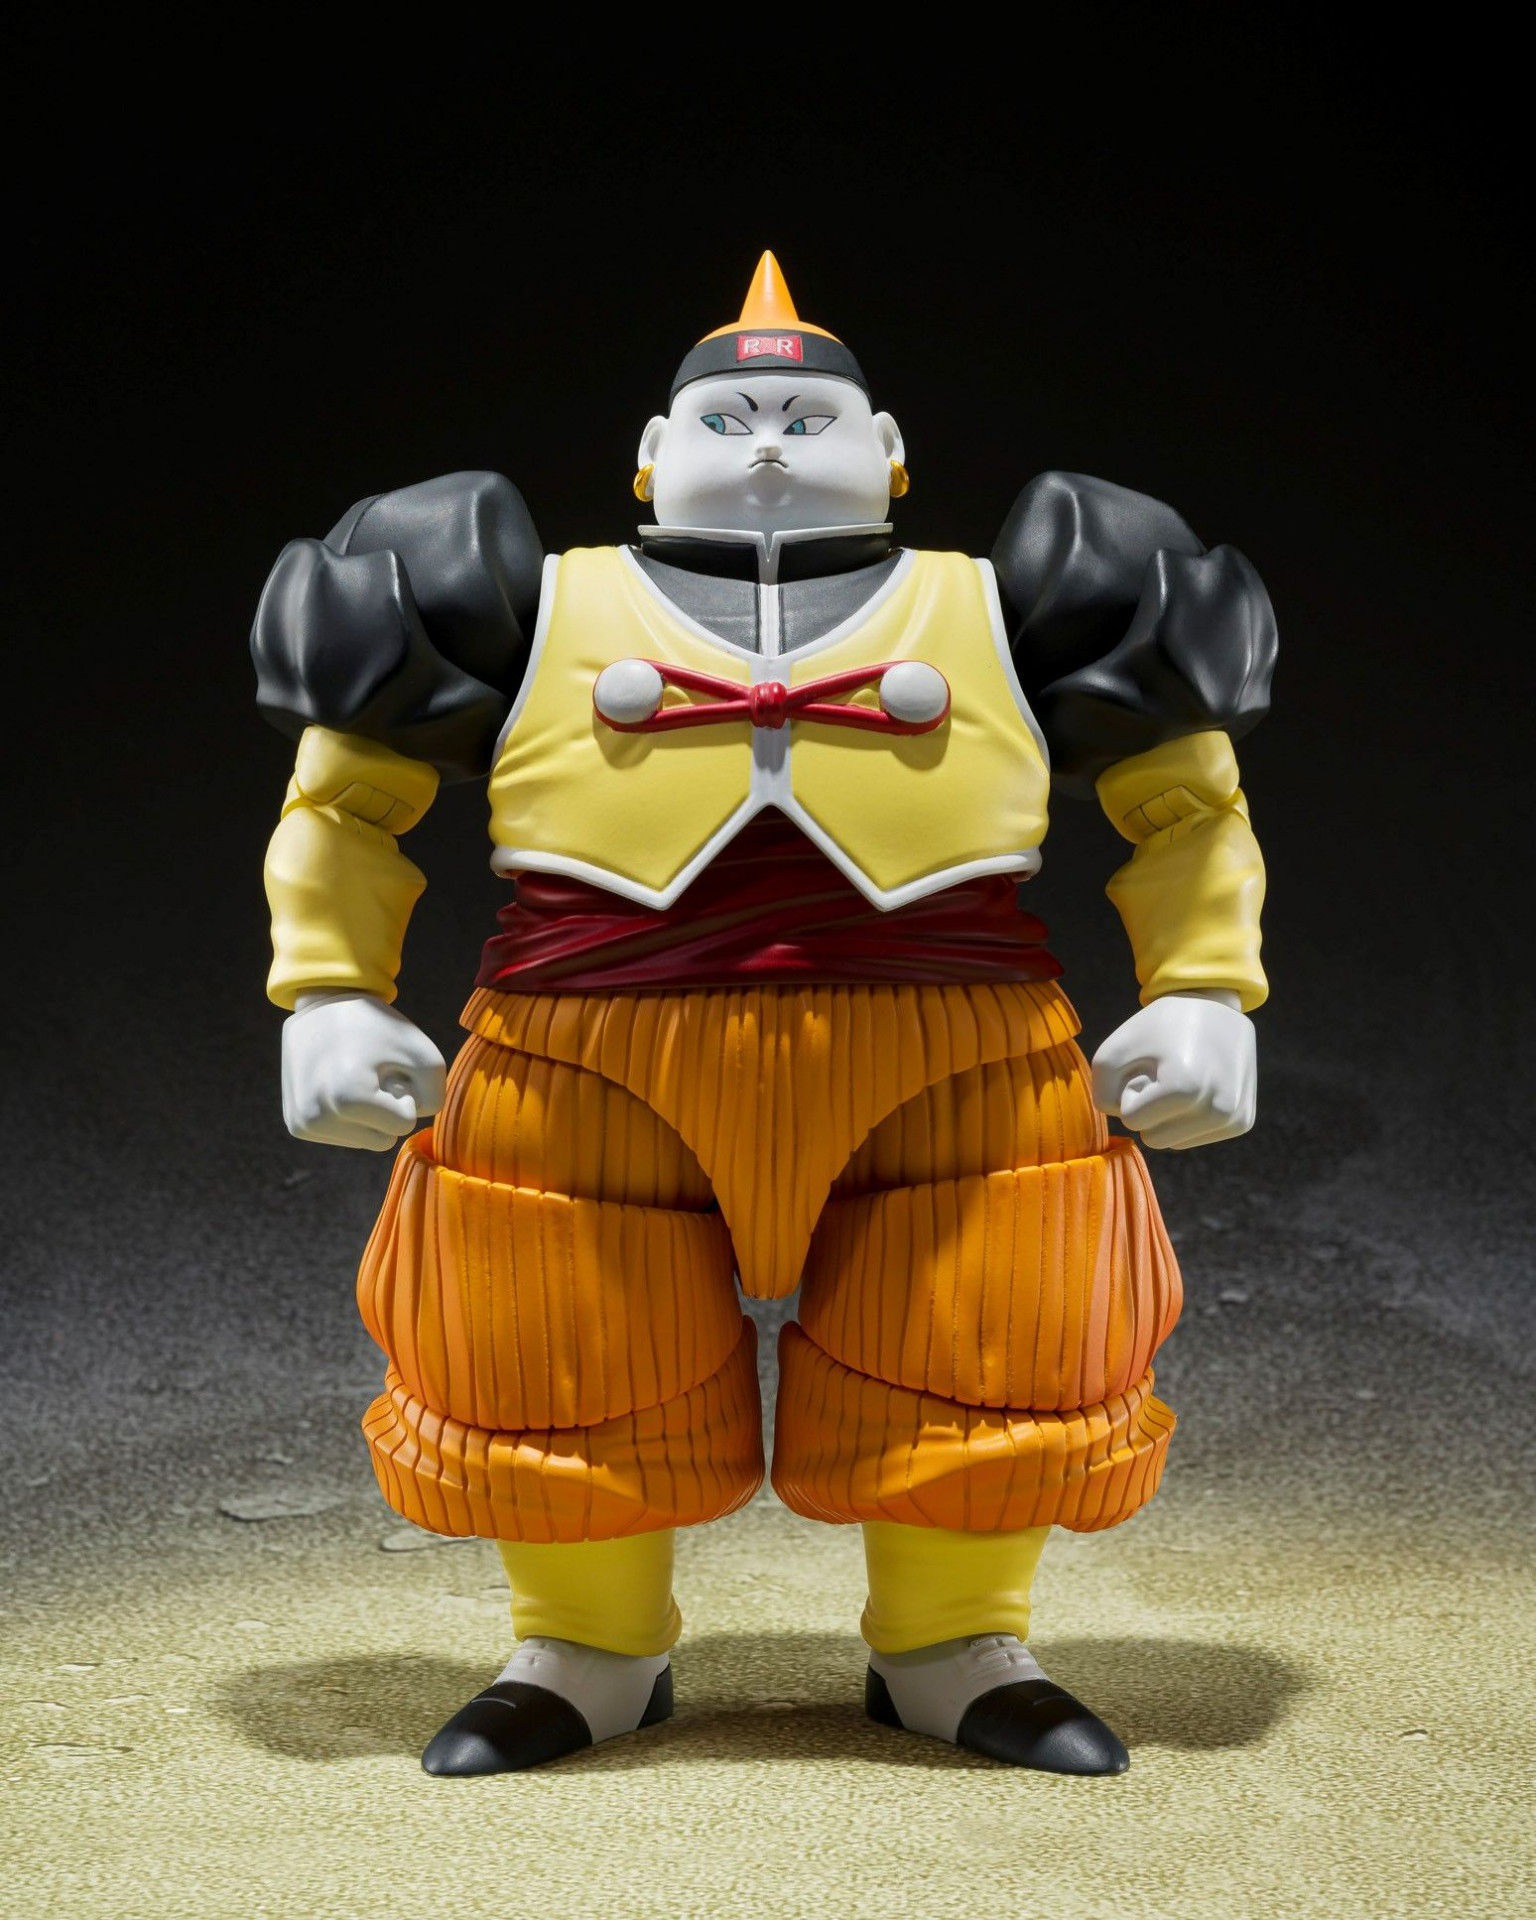 Android 19 From Dragon Ball Z Is Coming to S.H.Figuarts!